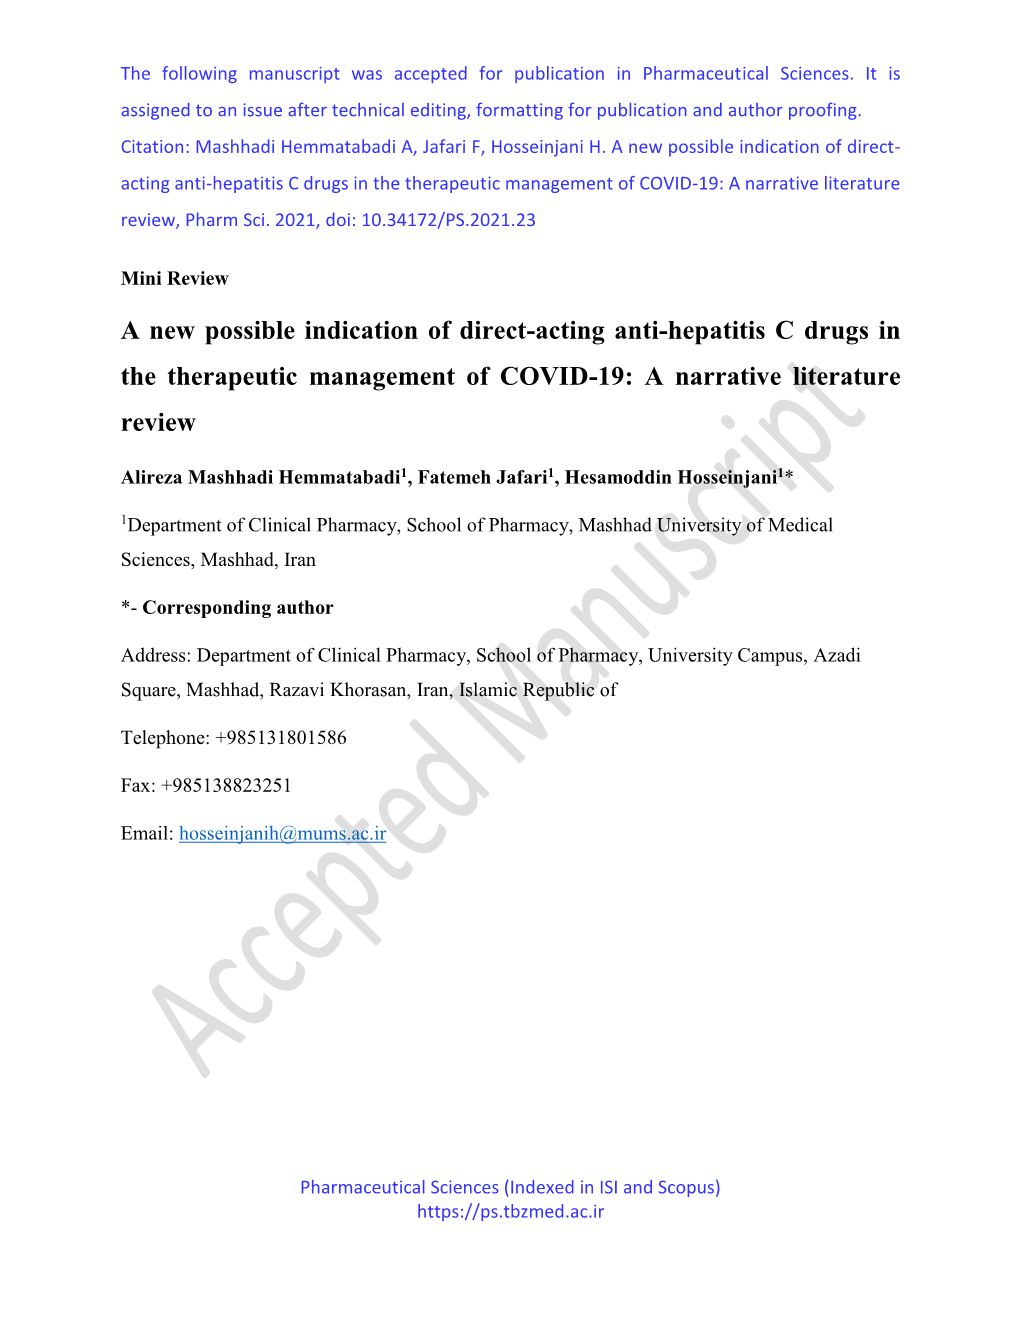 A New Possible Indication of Direct- Acting Anti-Hepatitis C Drugs in the Therapeutic Management of COVID-19: a Narrative Literature Review, Pharm Sci